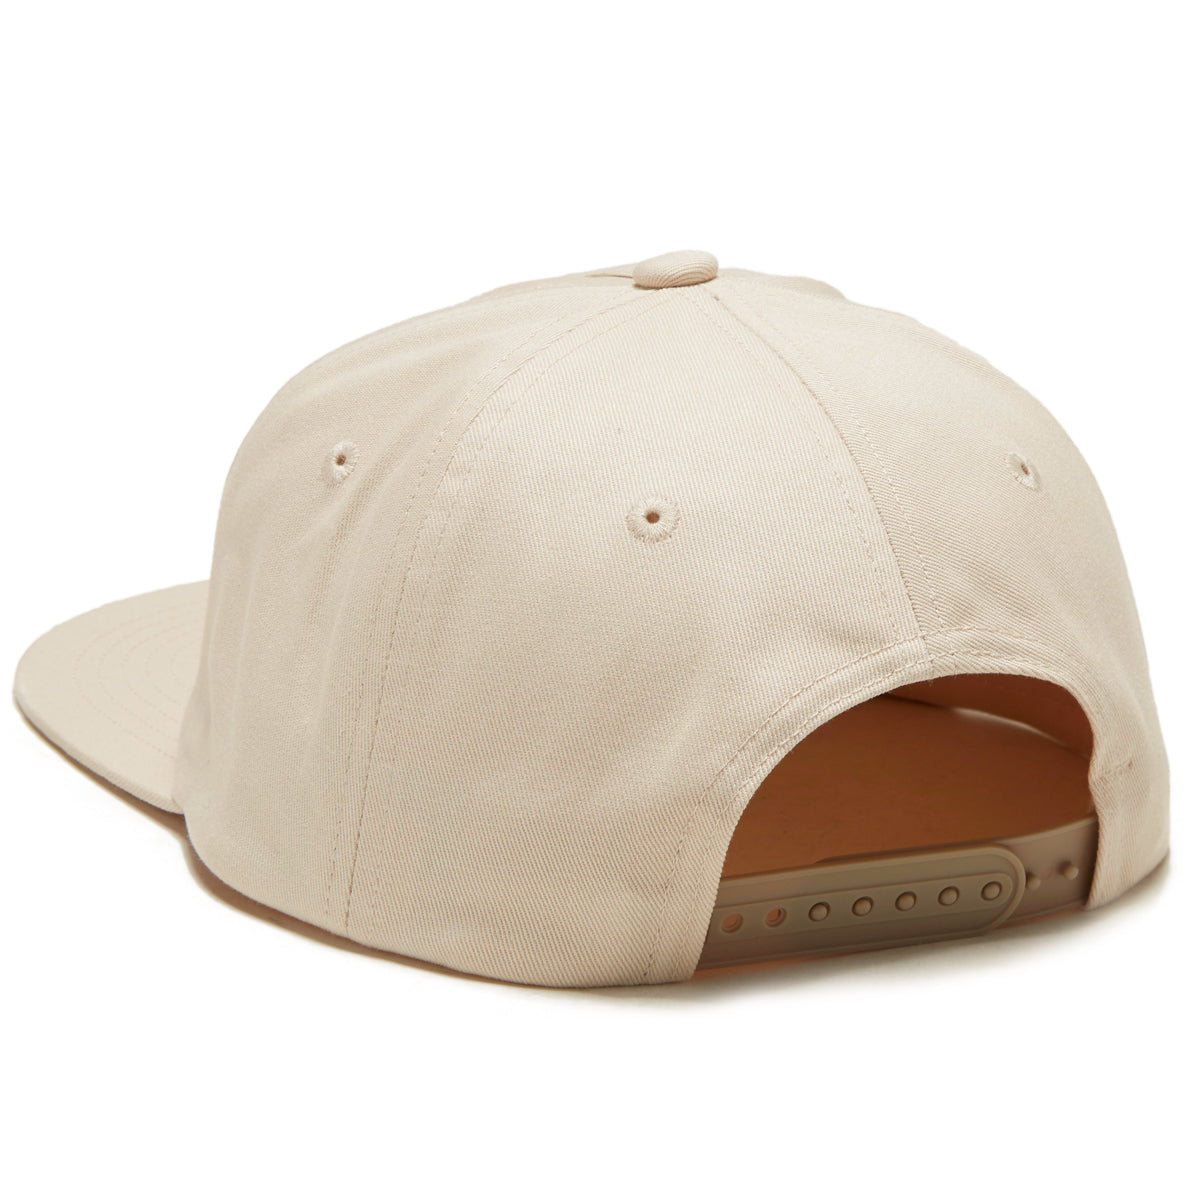 Herschel Supply Scout Cap Embroidery Hat - Whitecap Gray/Light Taupe image 2